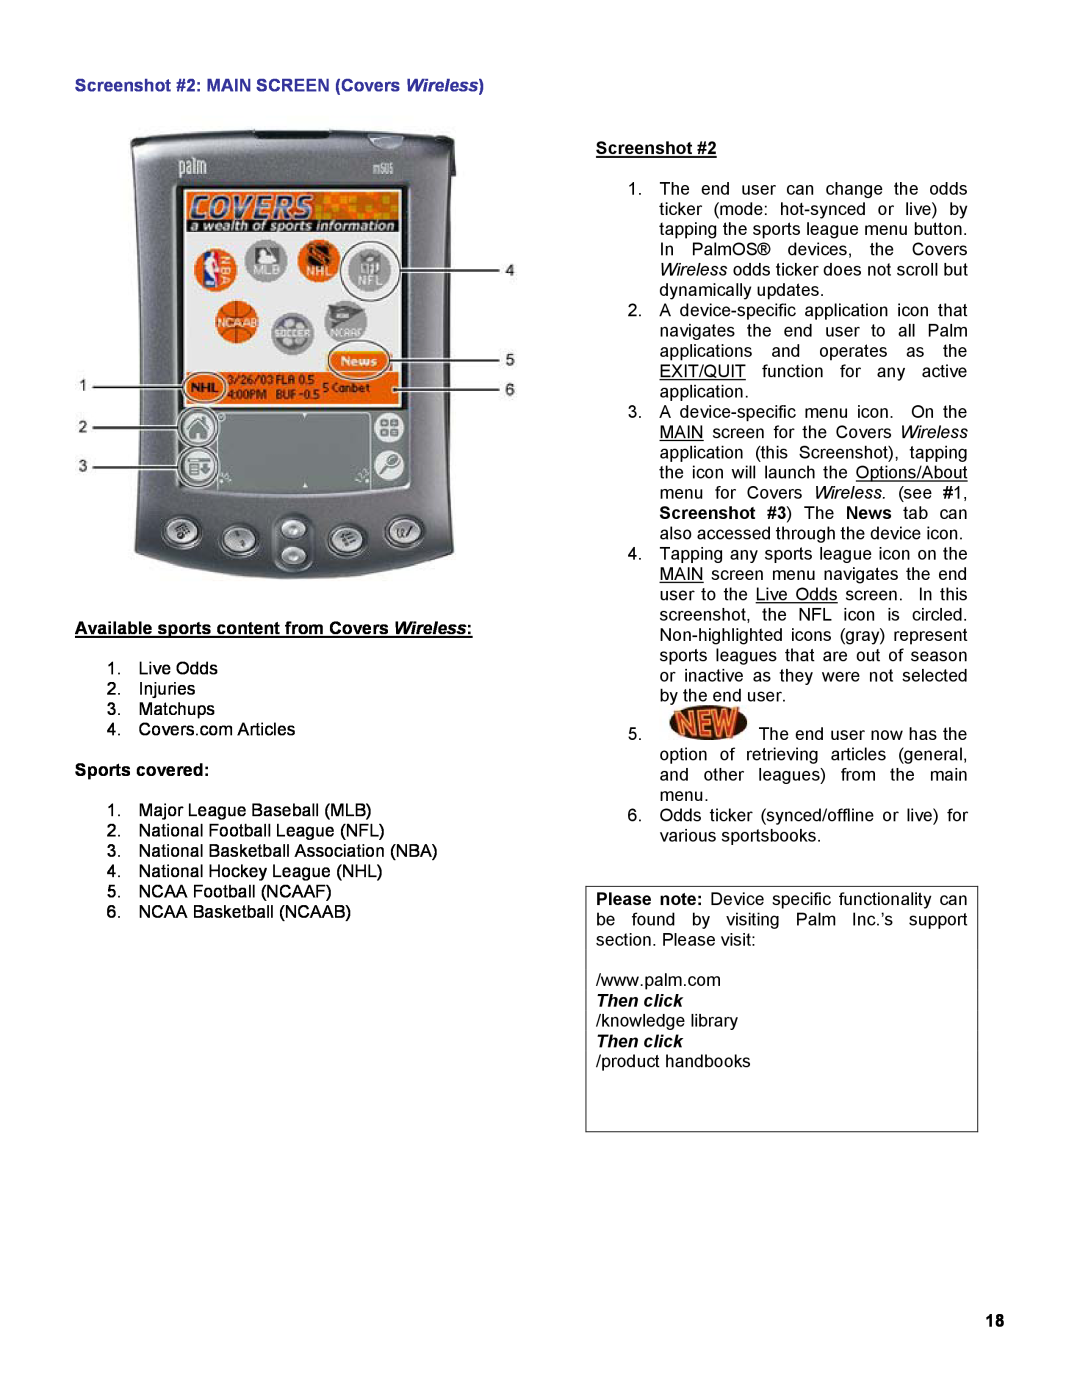 Palm OS Devices Screenshot #2 MAIN SCREEN Covers Wireless, Available sports content from Covers Wireless, Sports covered 